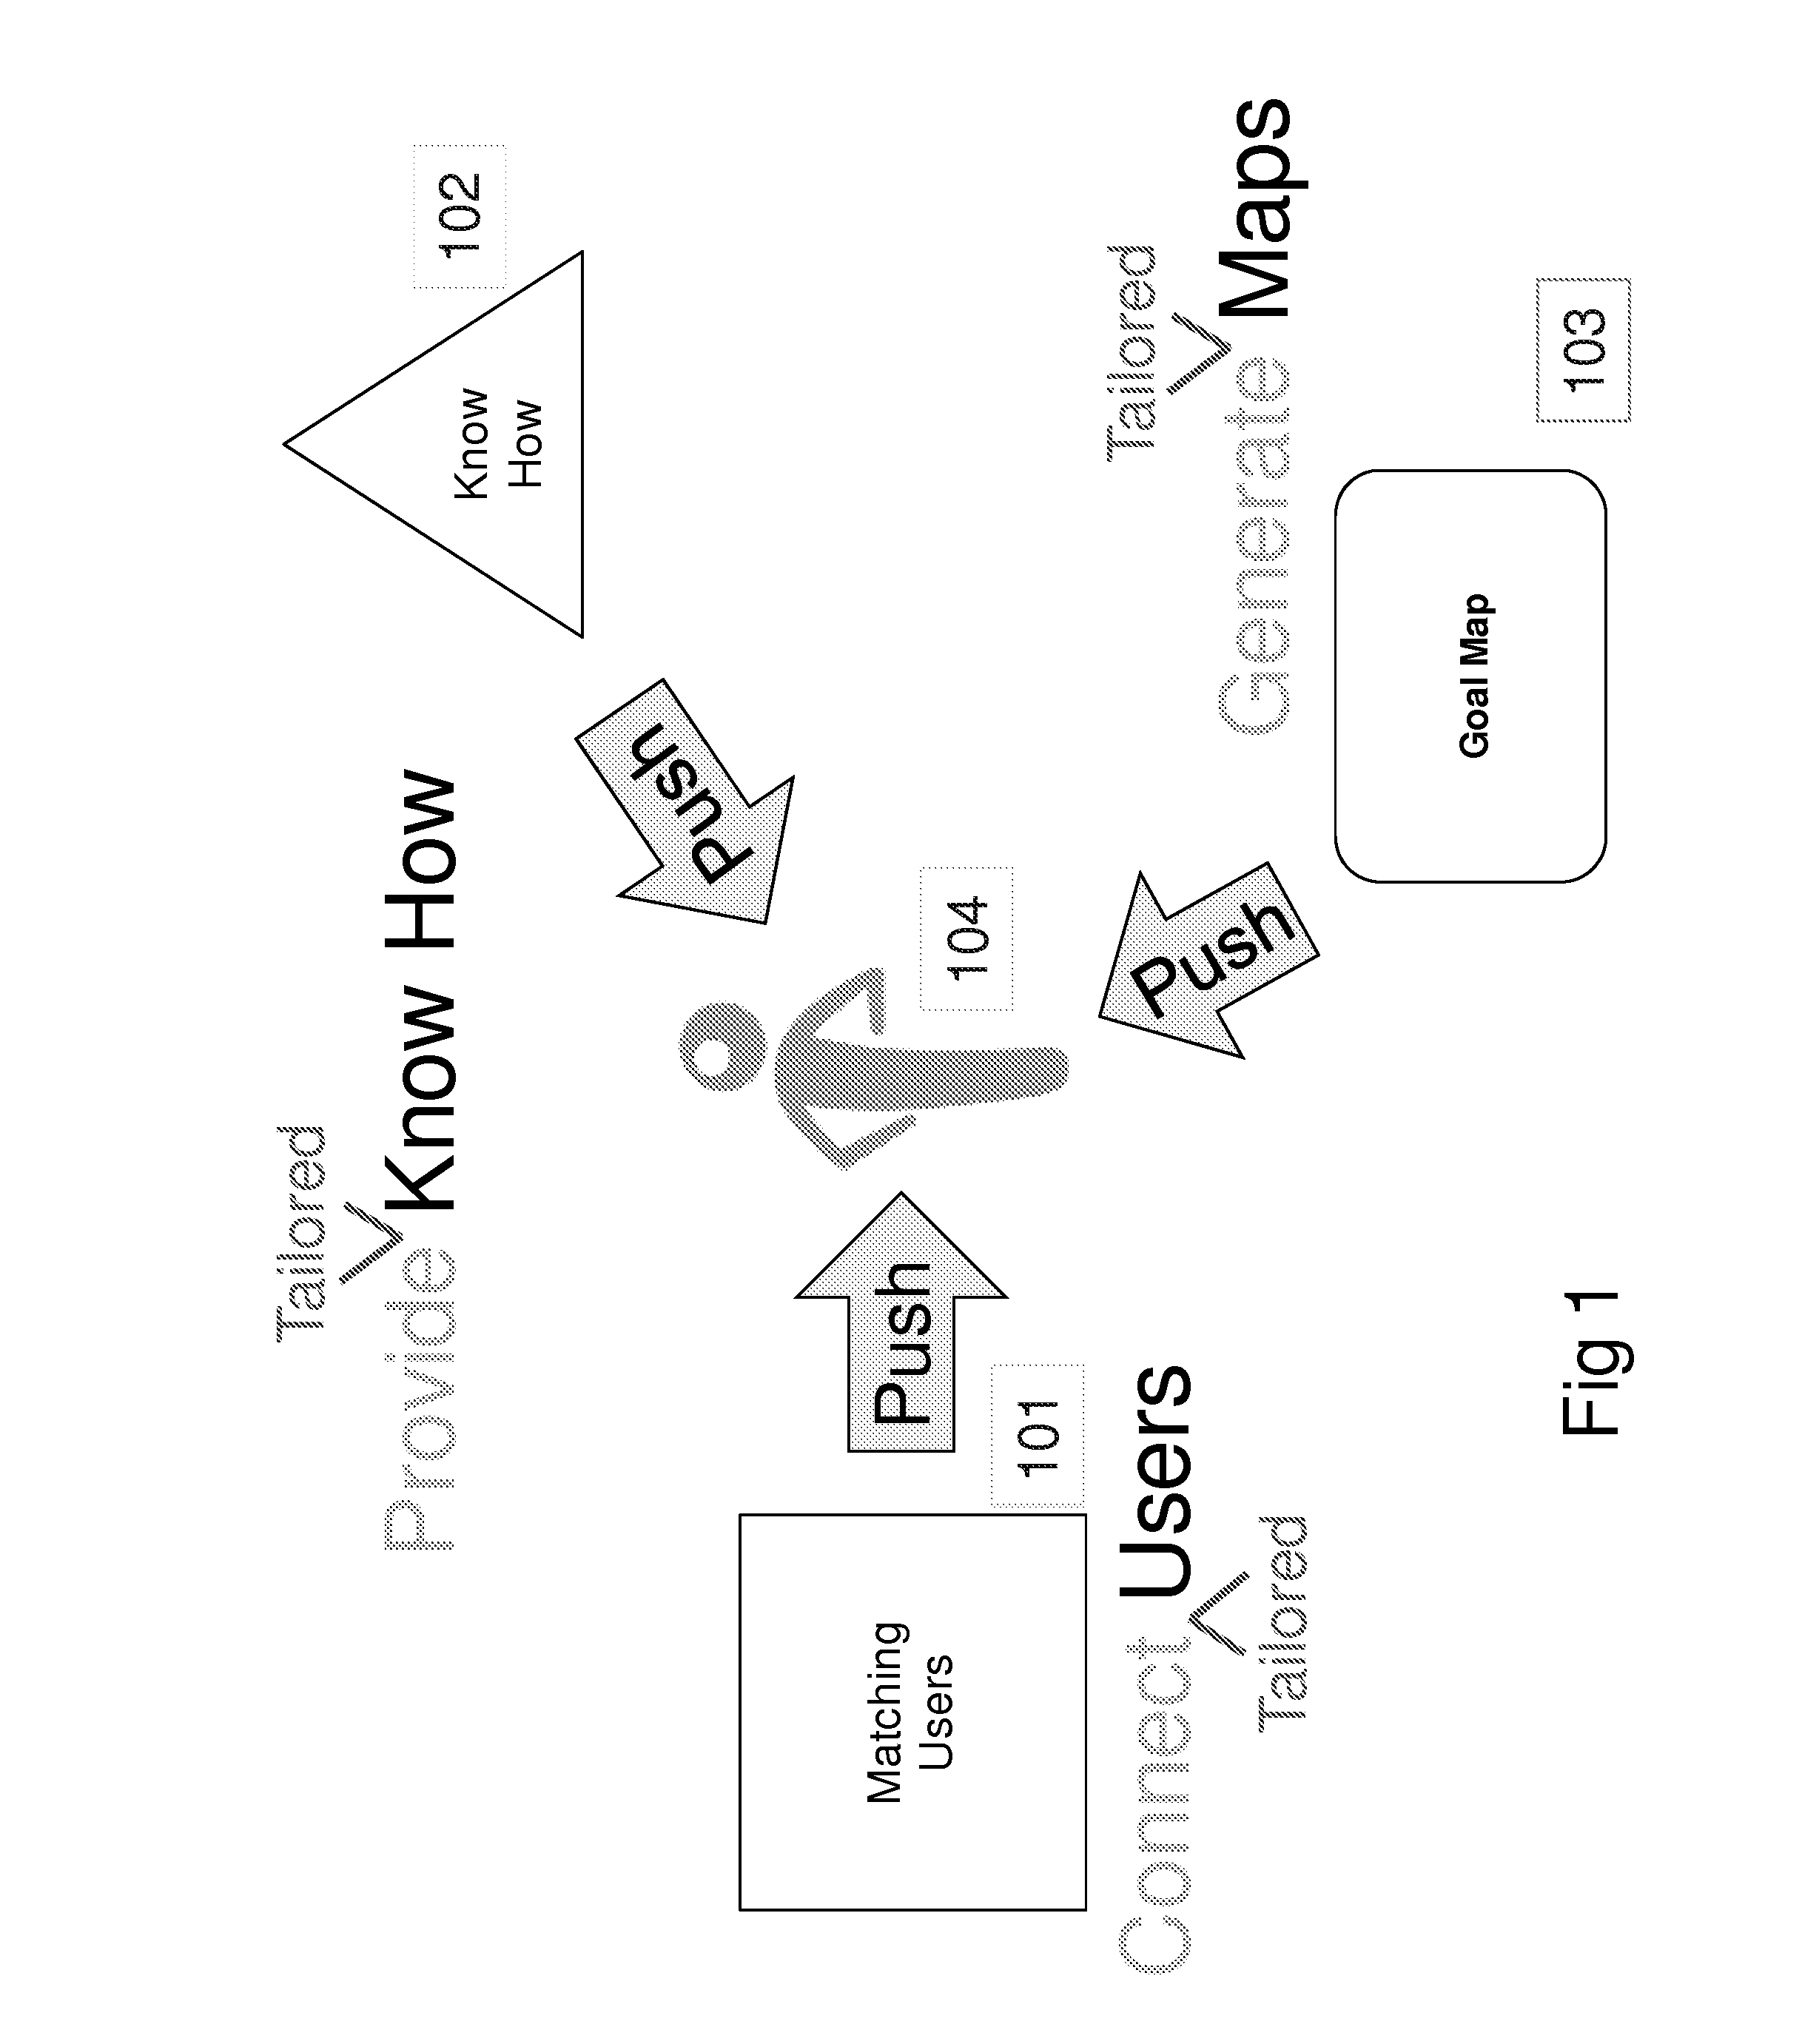 Method and system for intelligently networked communities